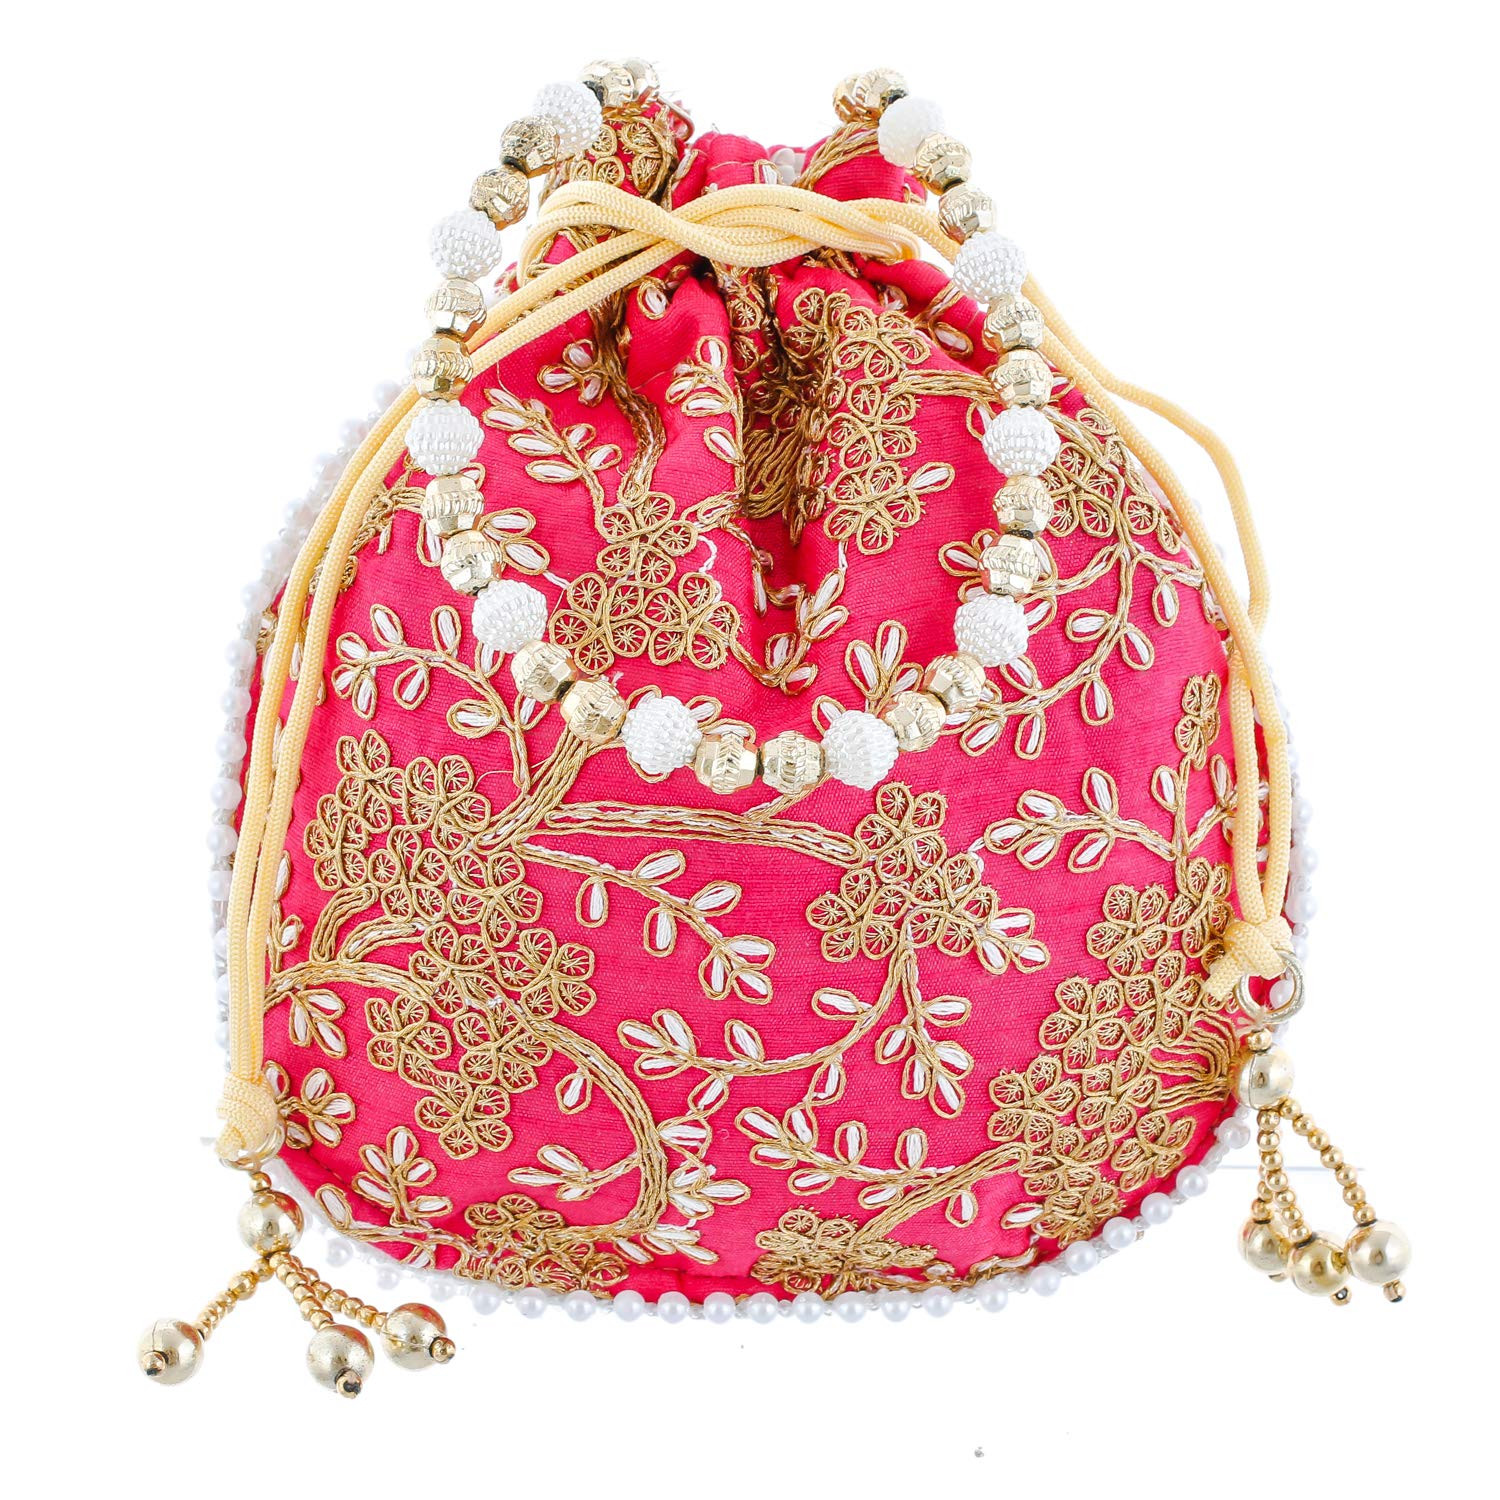 Kuber Industries Embroidery Drawstring Potli|Hand Purse With Gold Pearl Border & Handle For Woman,Girls (Pink)